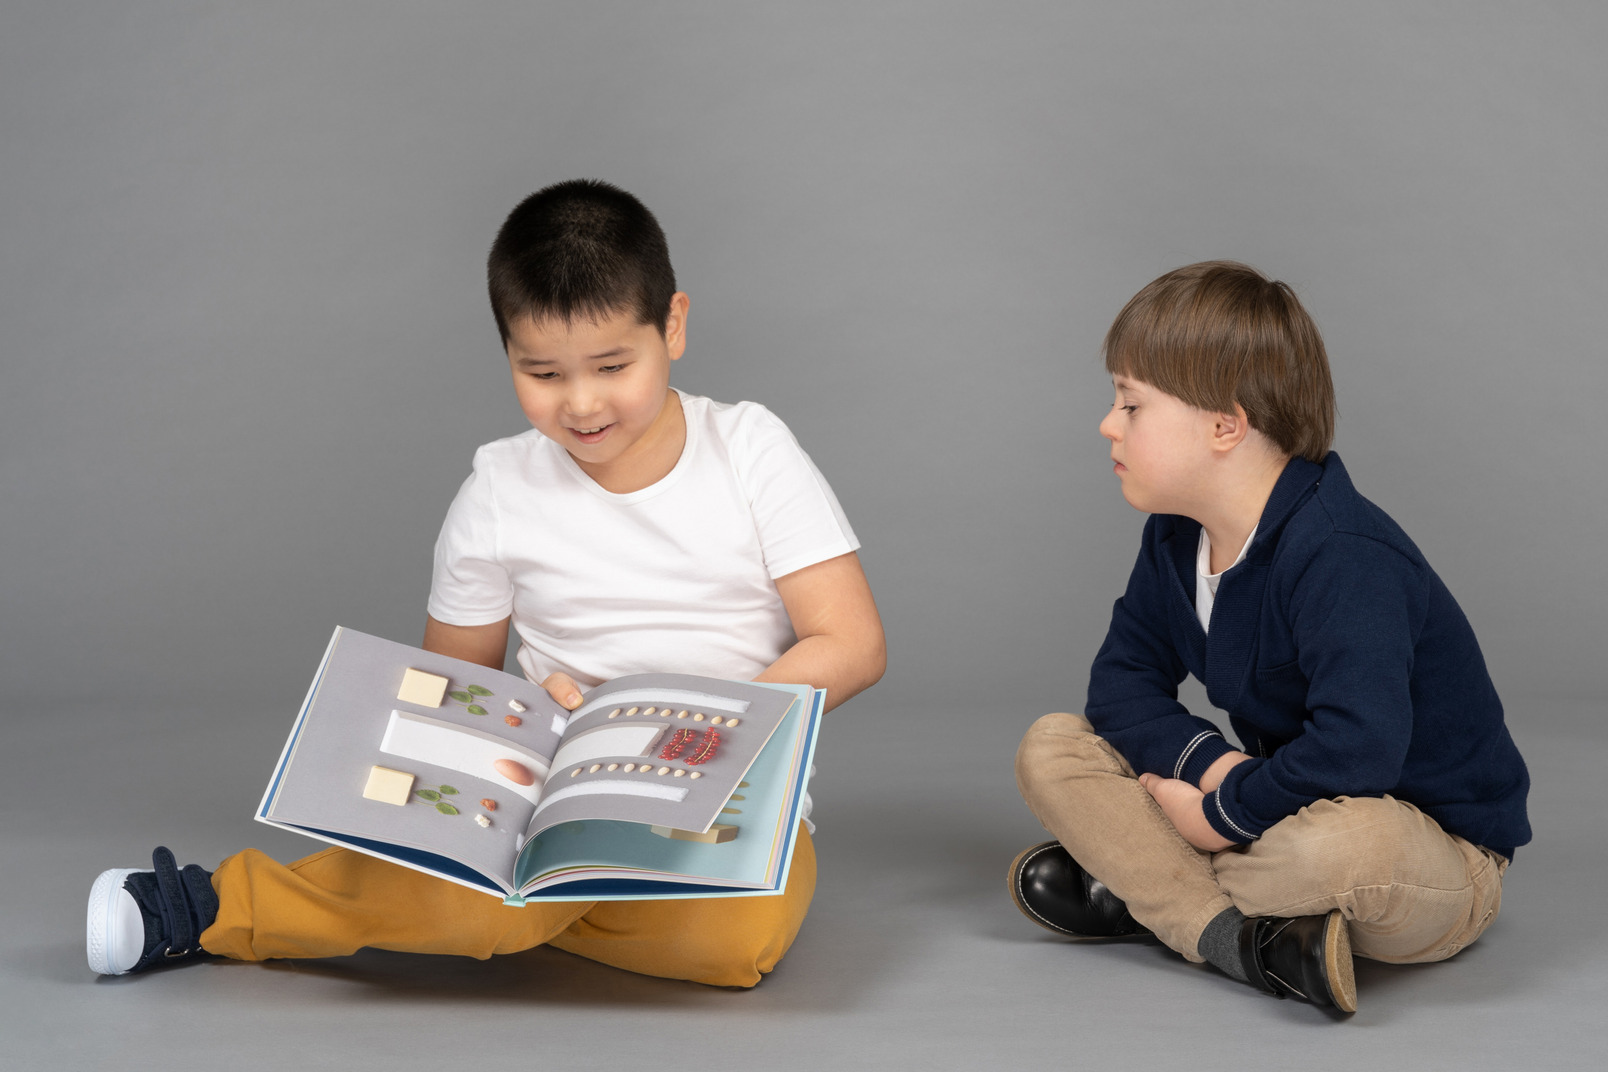 Two little friends reading book together